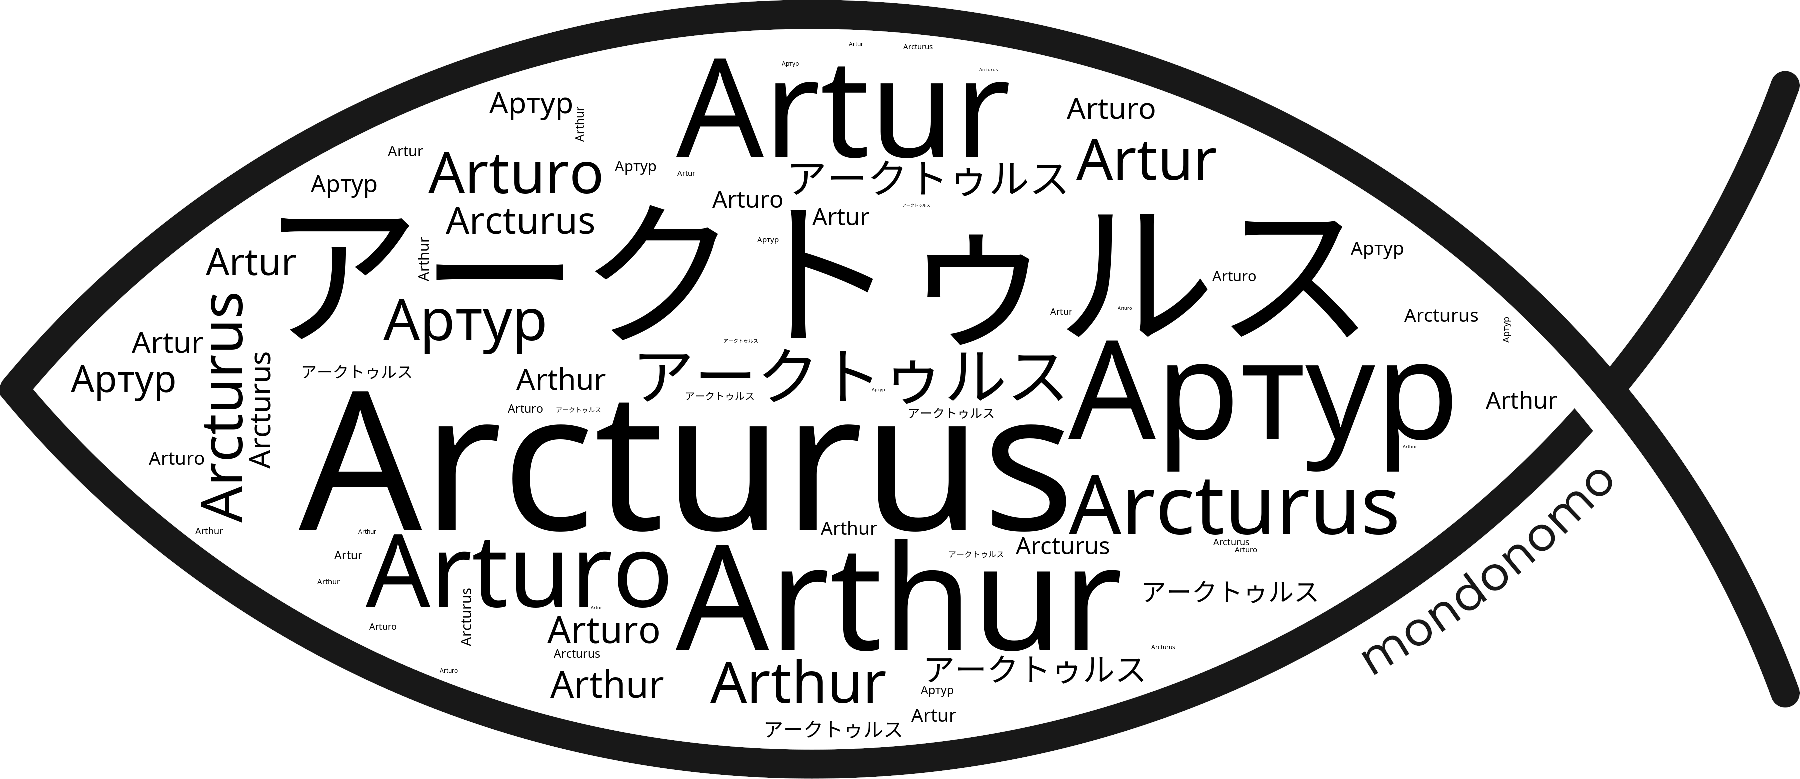 Name Arcturus in the world's Bibles